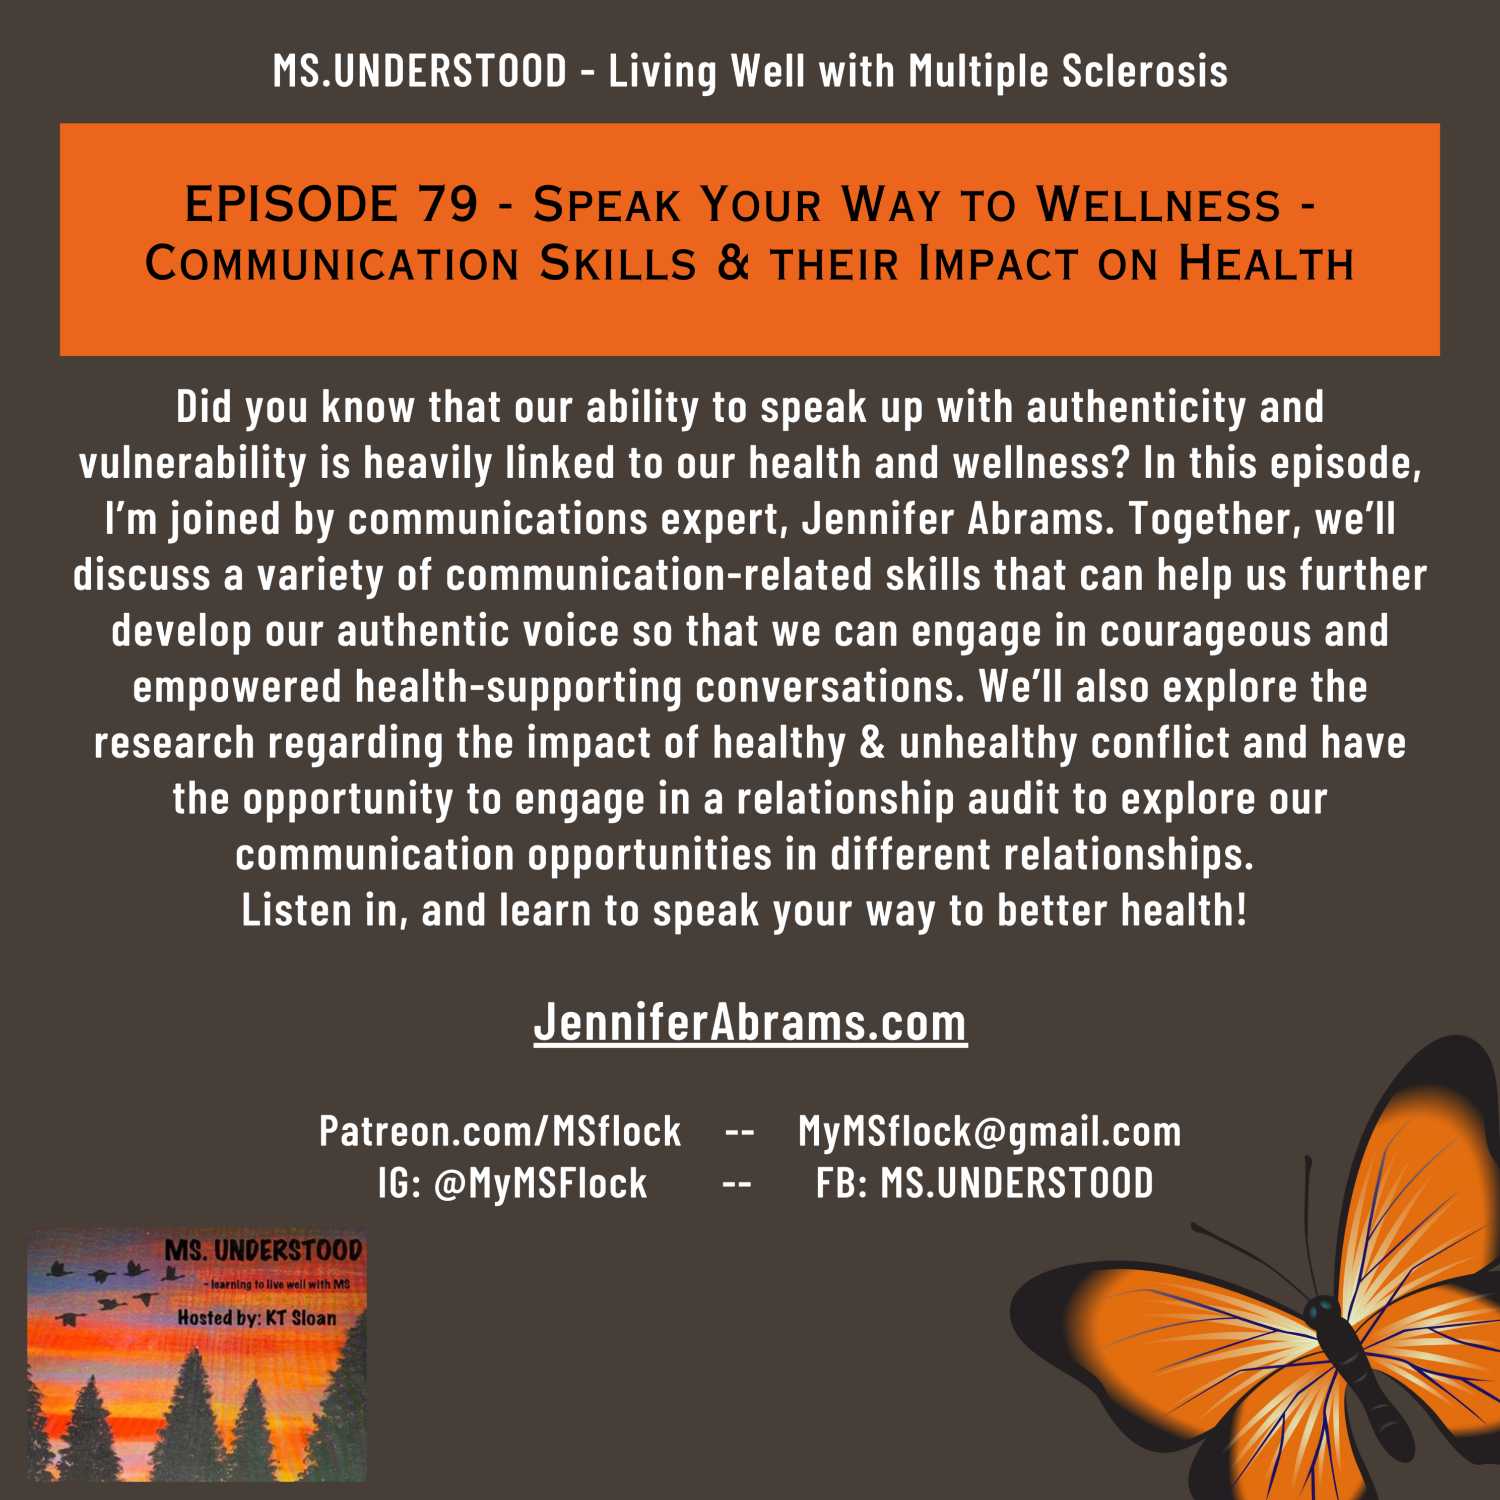 EPISODE 79 - Speak Your Way to Wellness - Communication Skills and their Impact on Health